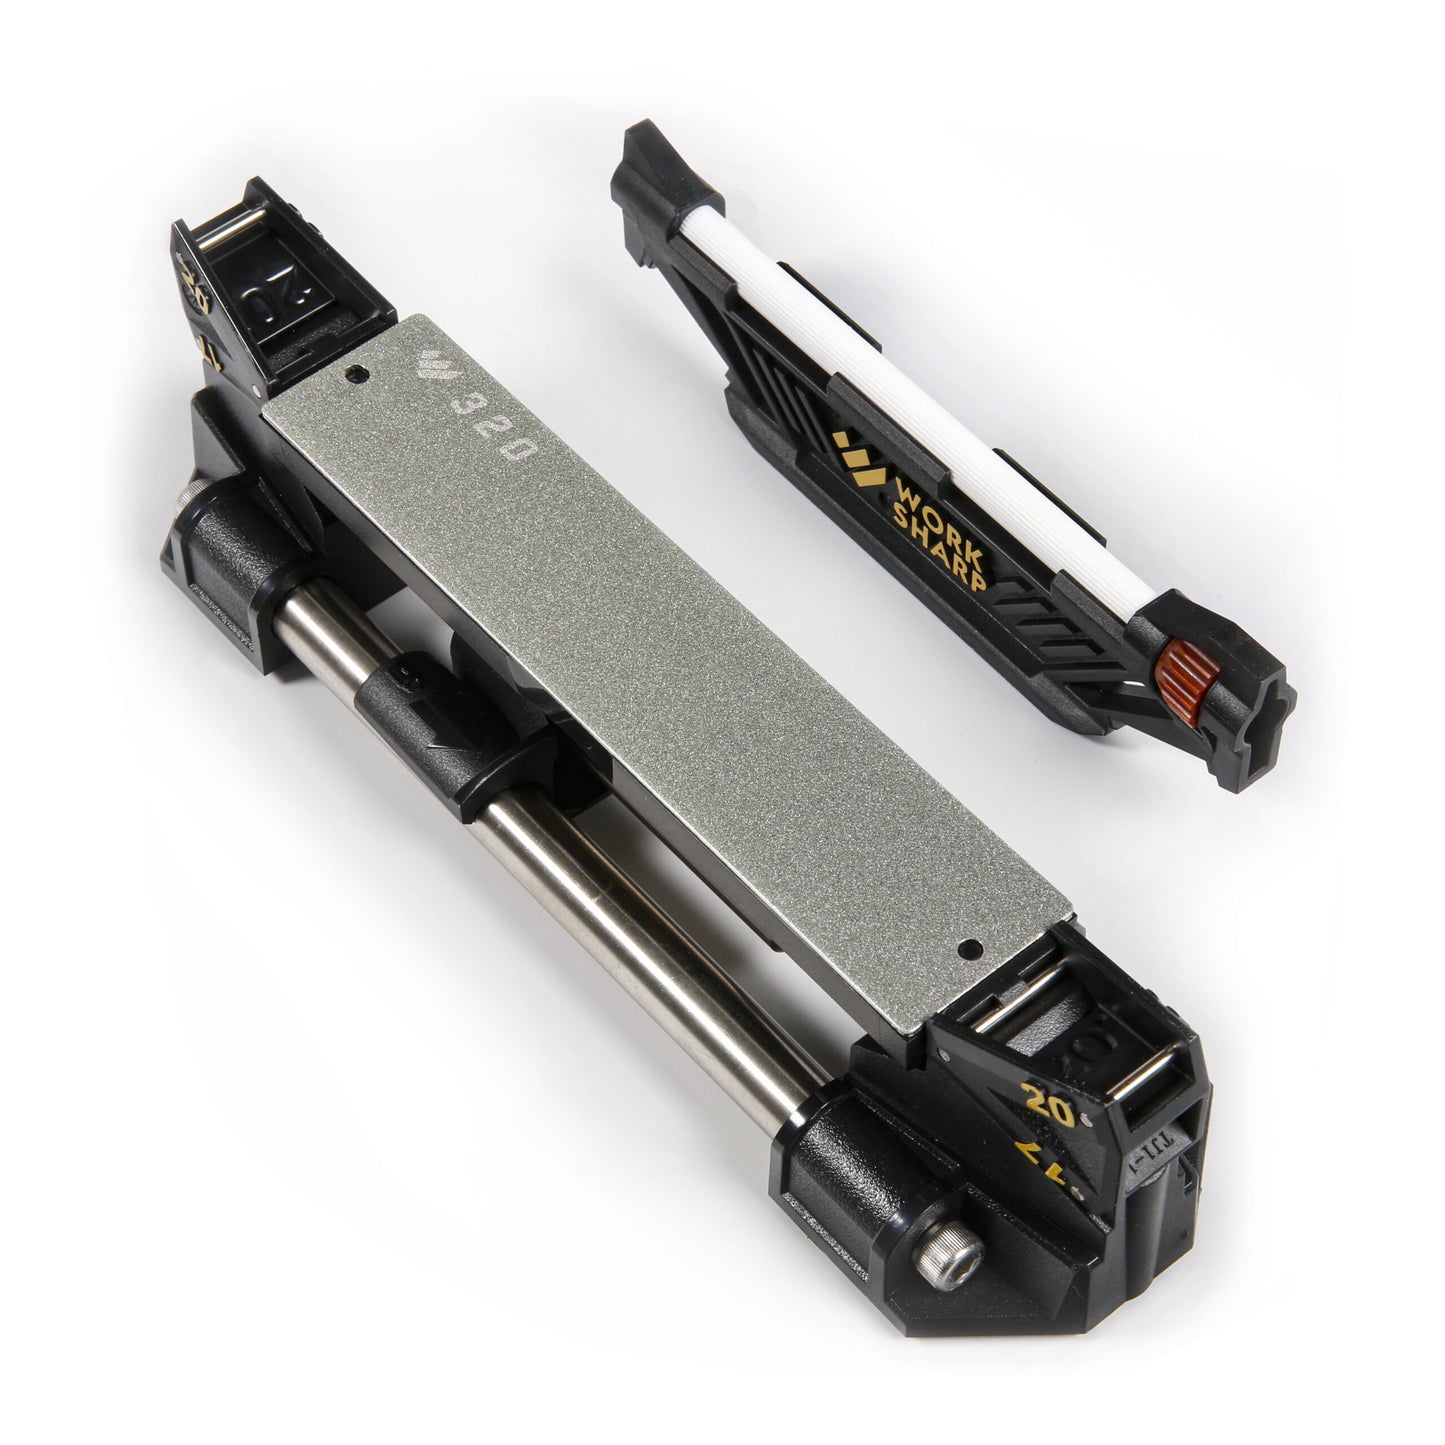 Work Sharp Guided Sharpening System WSGSS